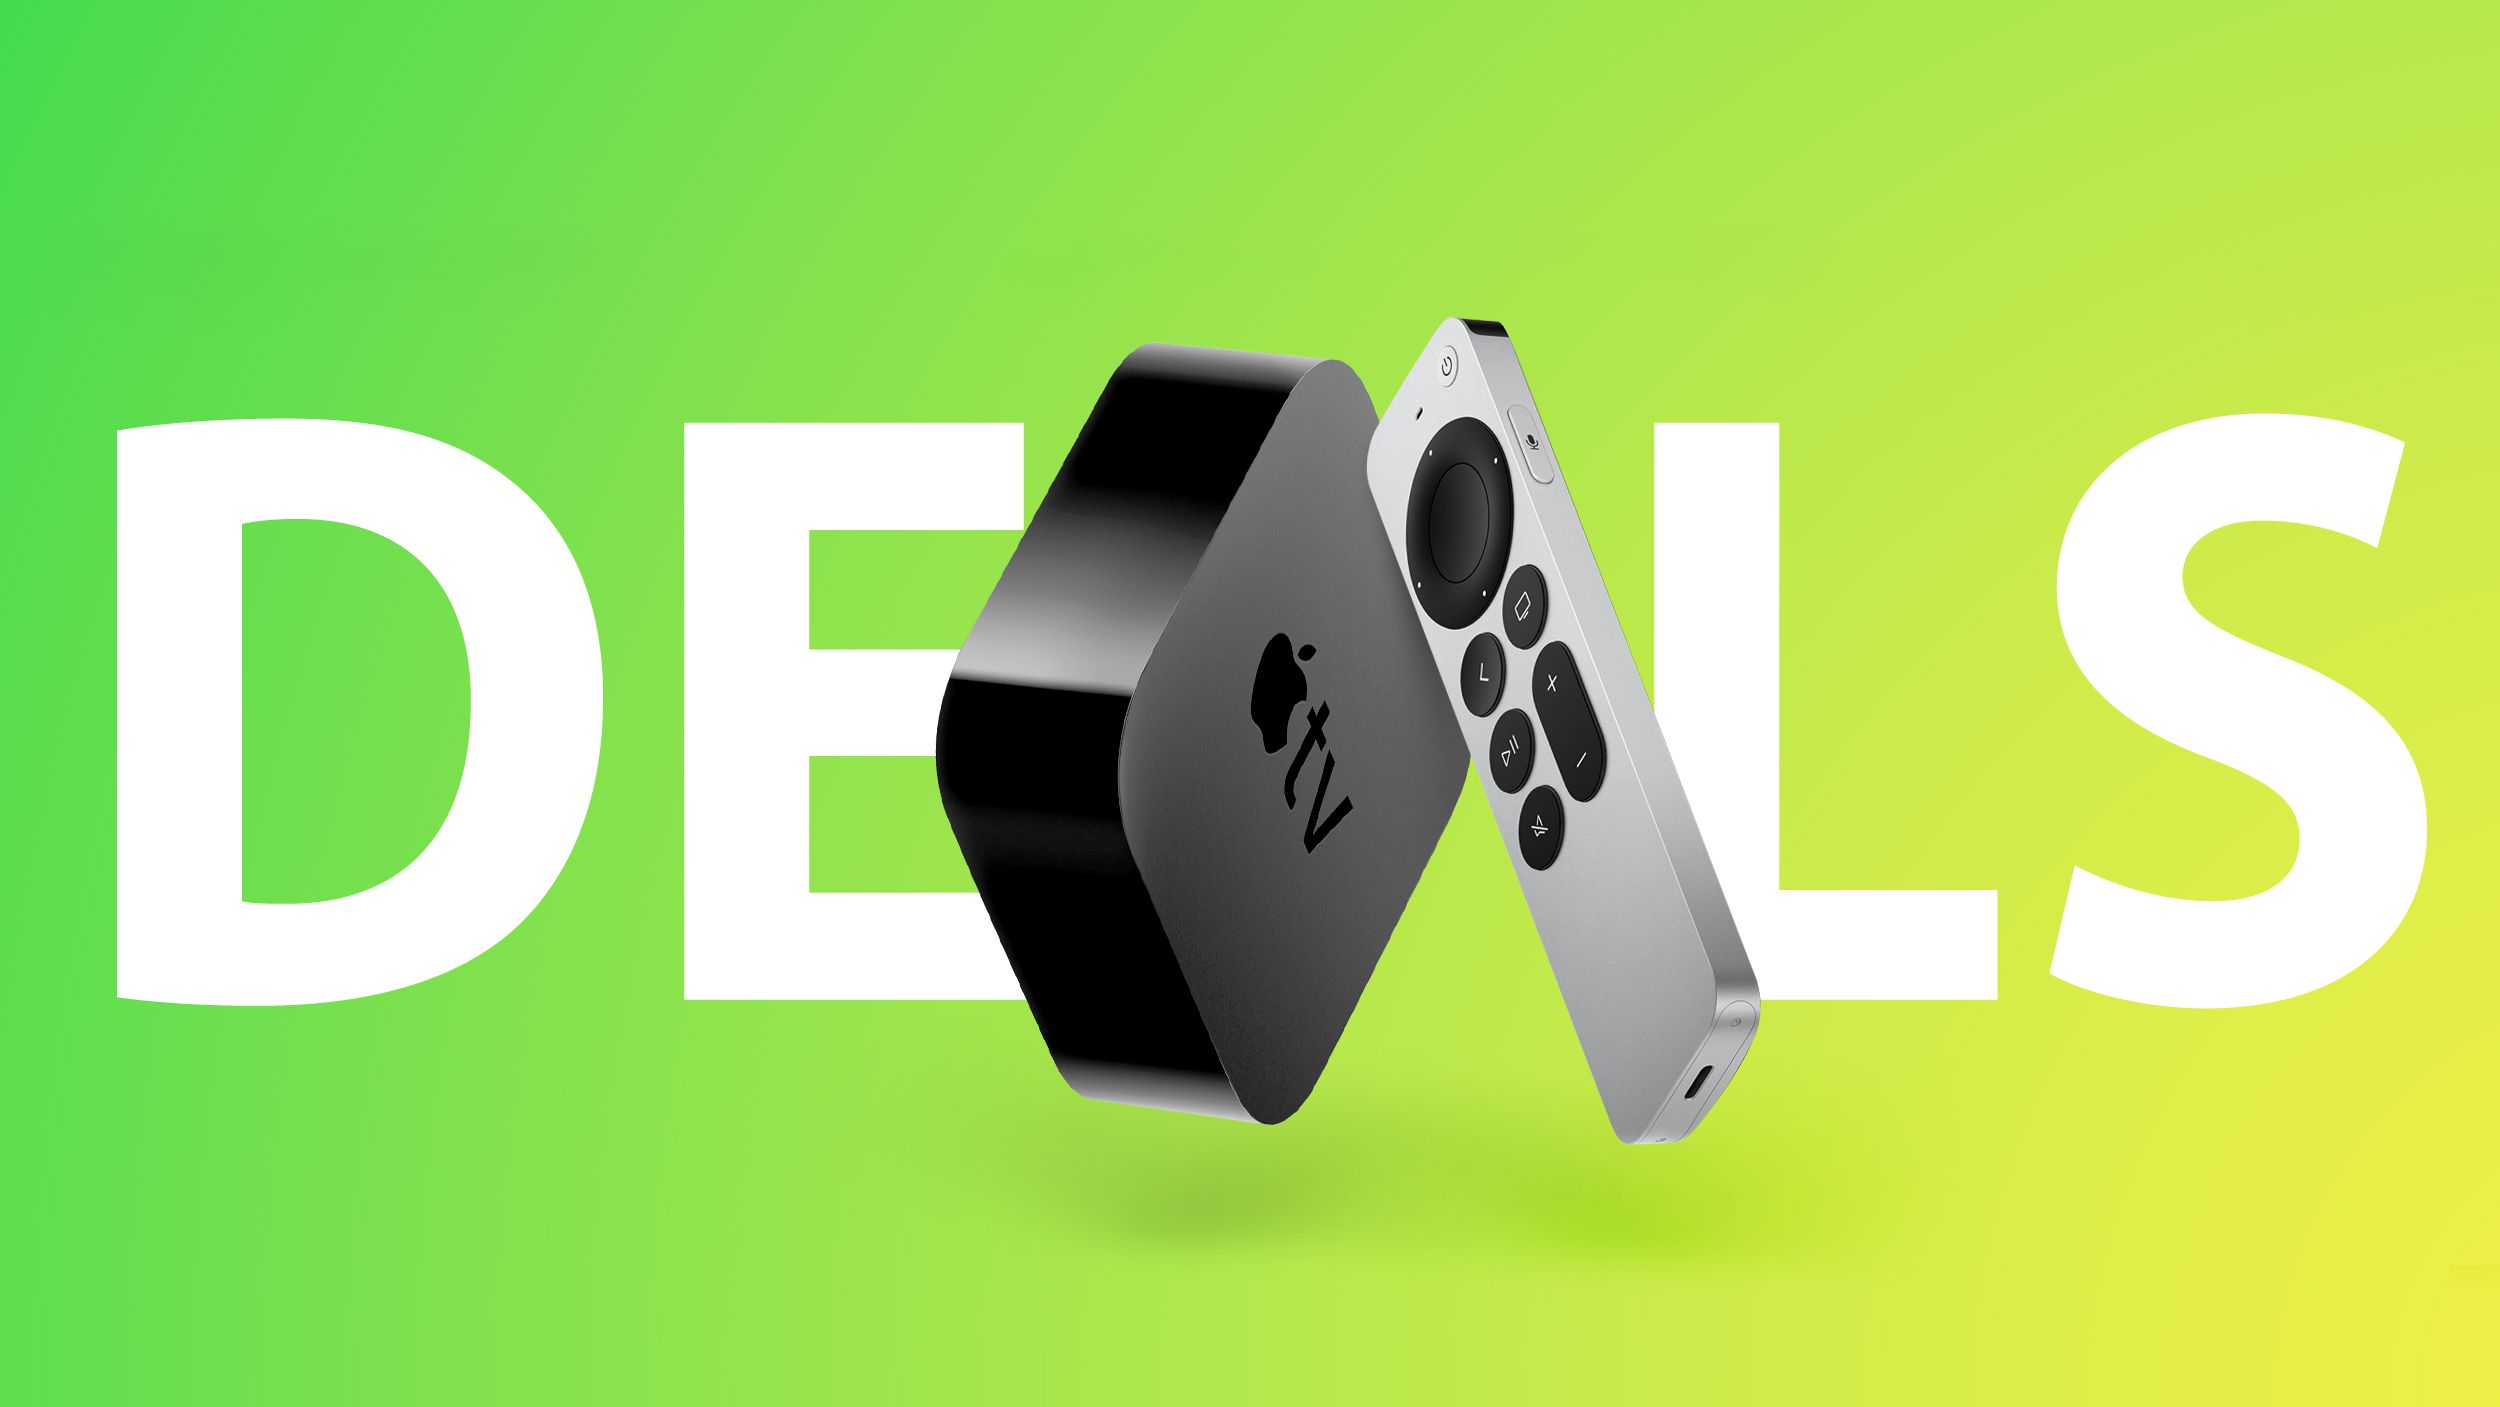 Deals: Get the 64GB Apple TV 4K for All-Time Low Price of $149.99 ($49 Off) - macrumors.com